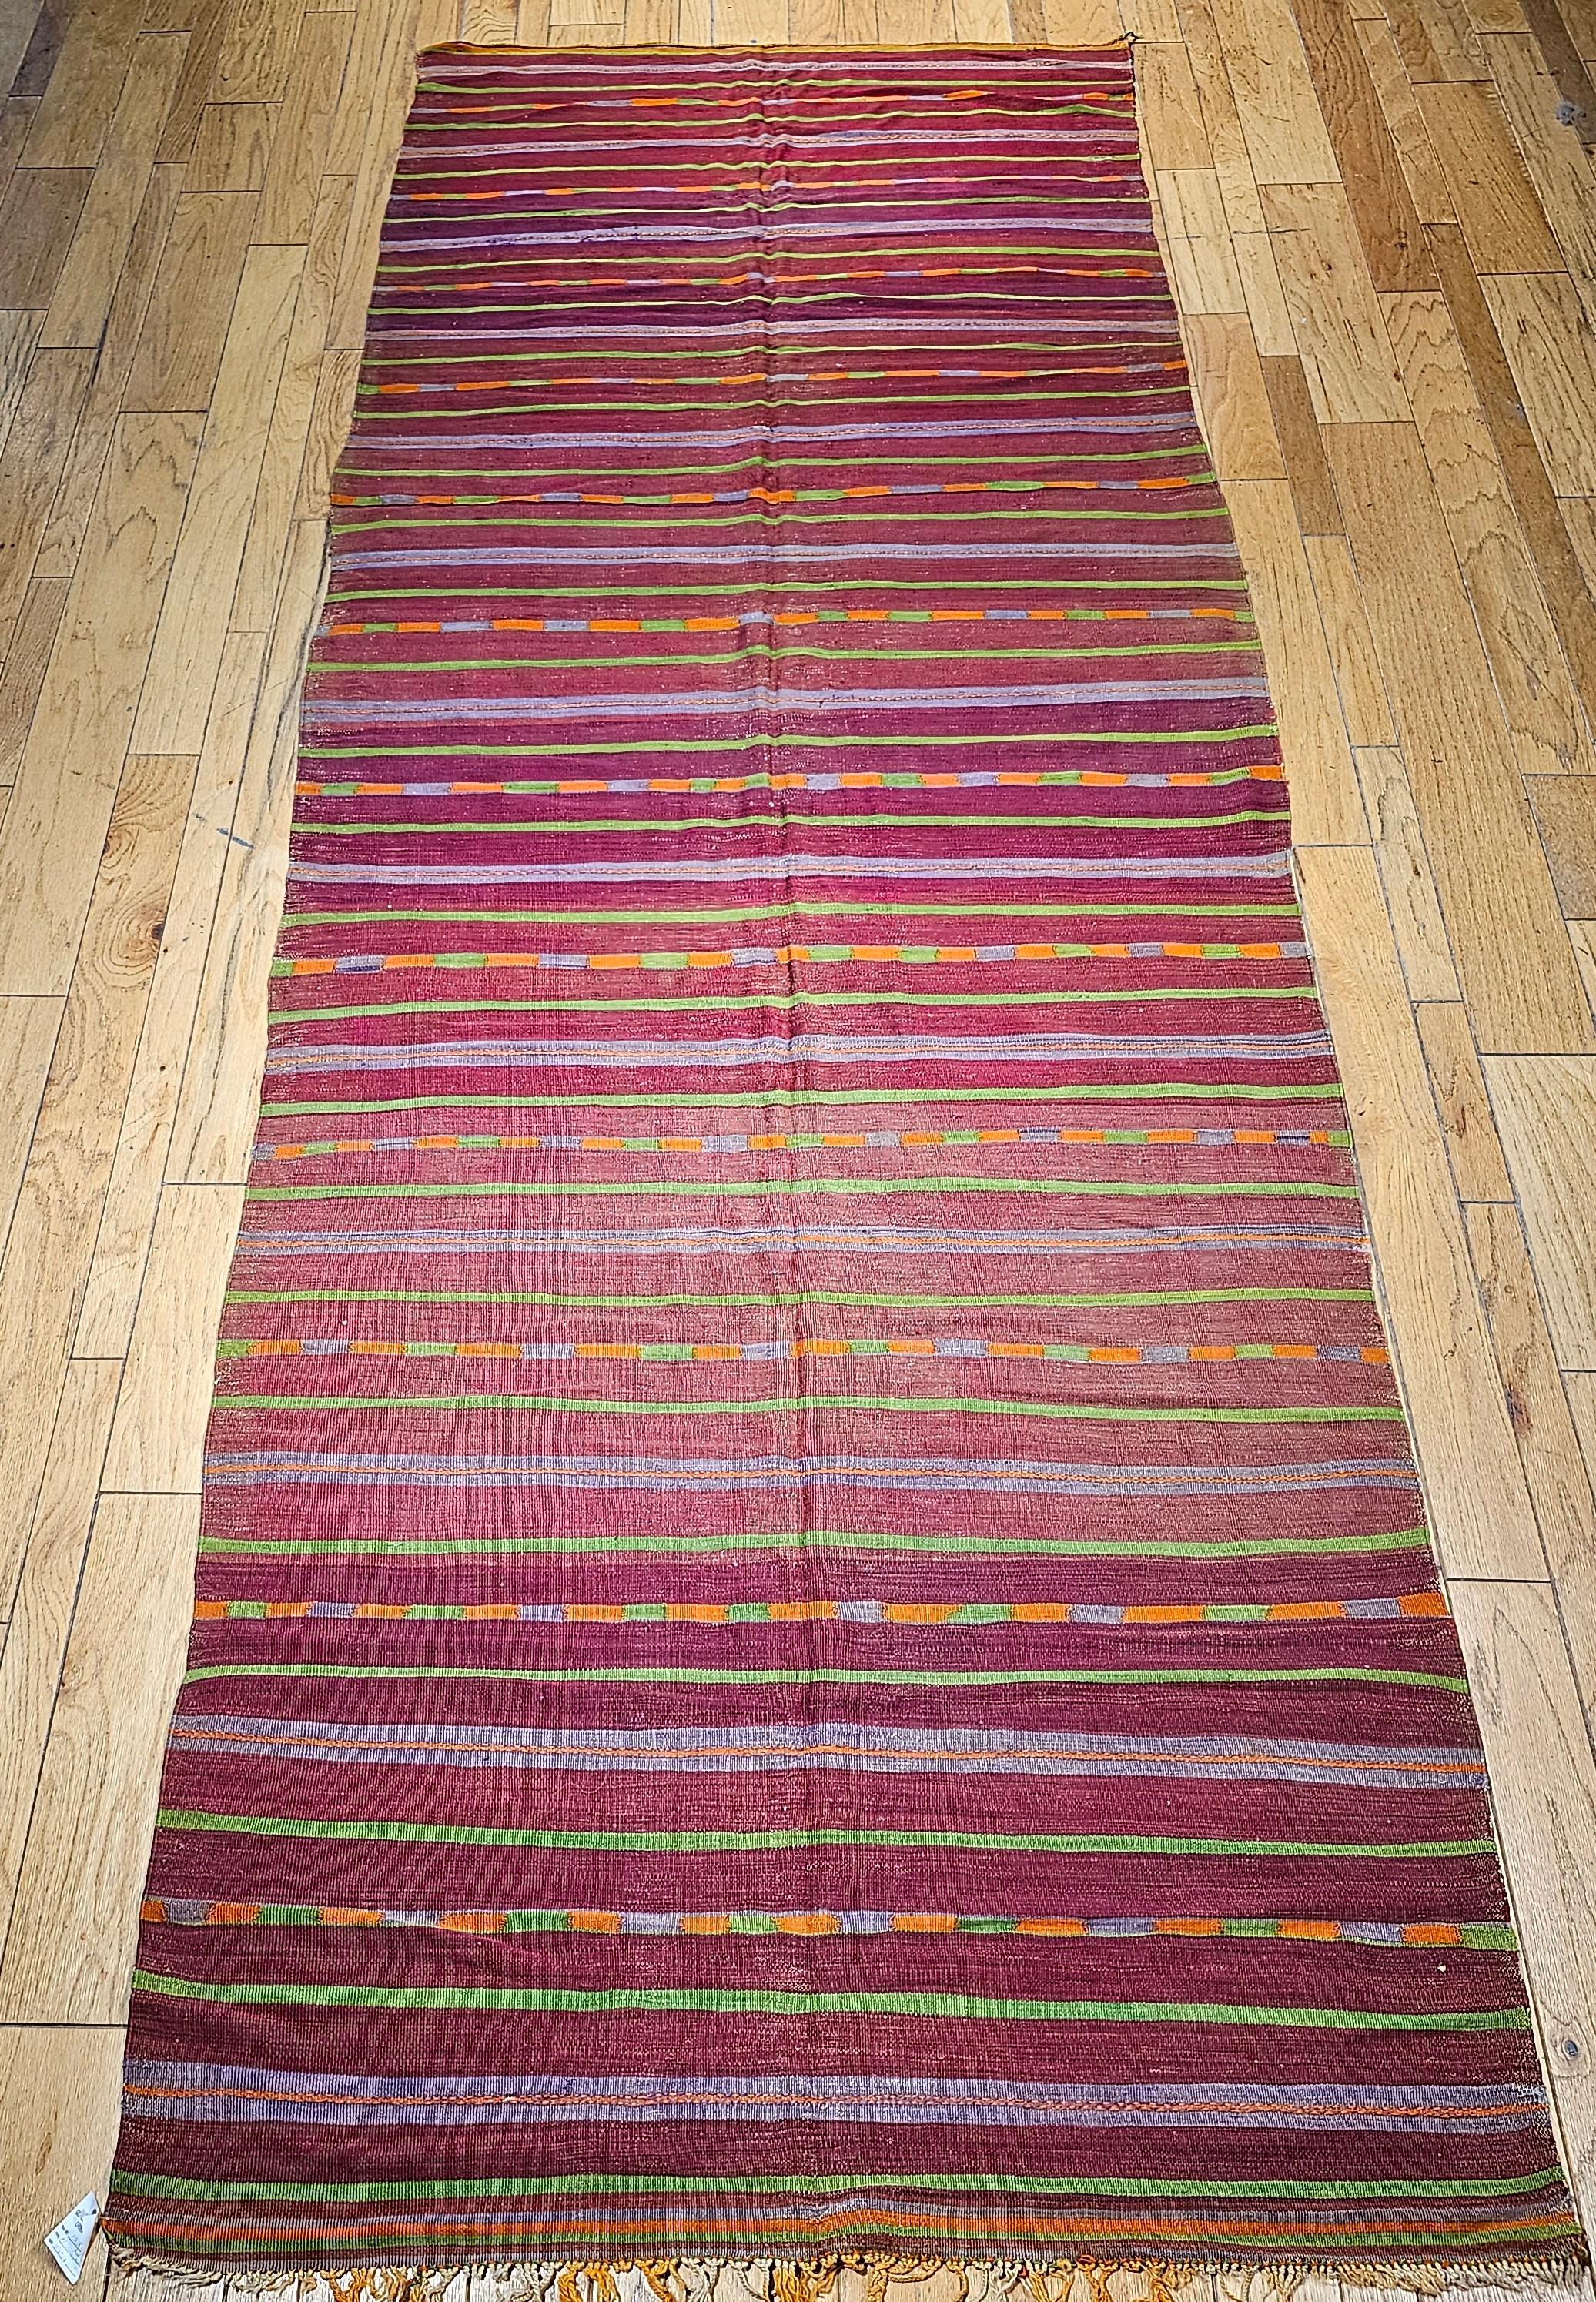 Beautiful Vintage Moroccan kilim rug from the mid 1900s in a beautiful stripe pattern and wonderful soft colors in red, green, purple, yellow, lavender, and other shades.   The size of the rug makes it ideal either as a gallery or corridor rug or a